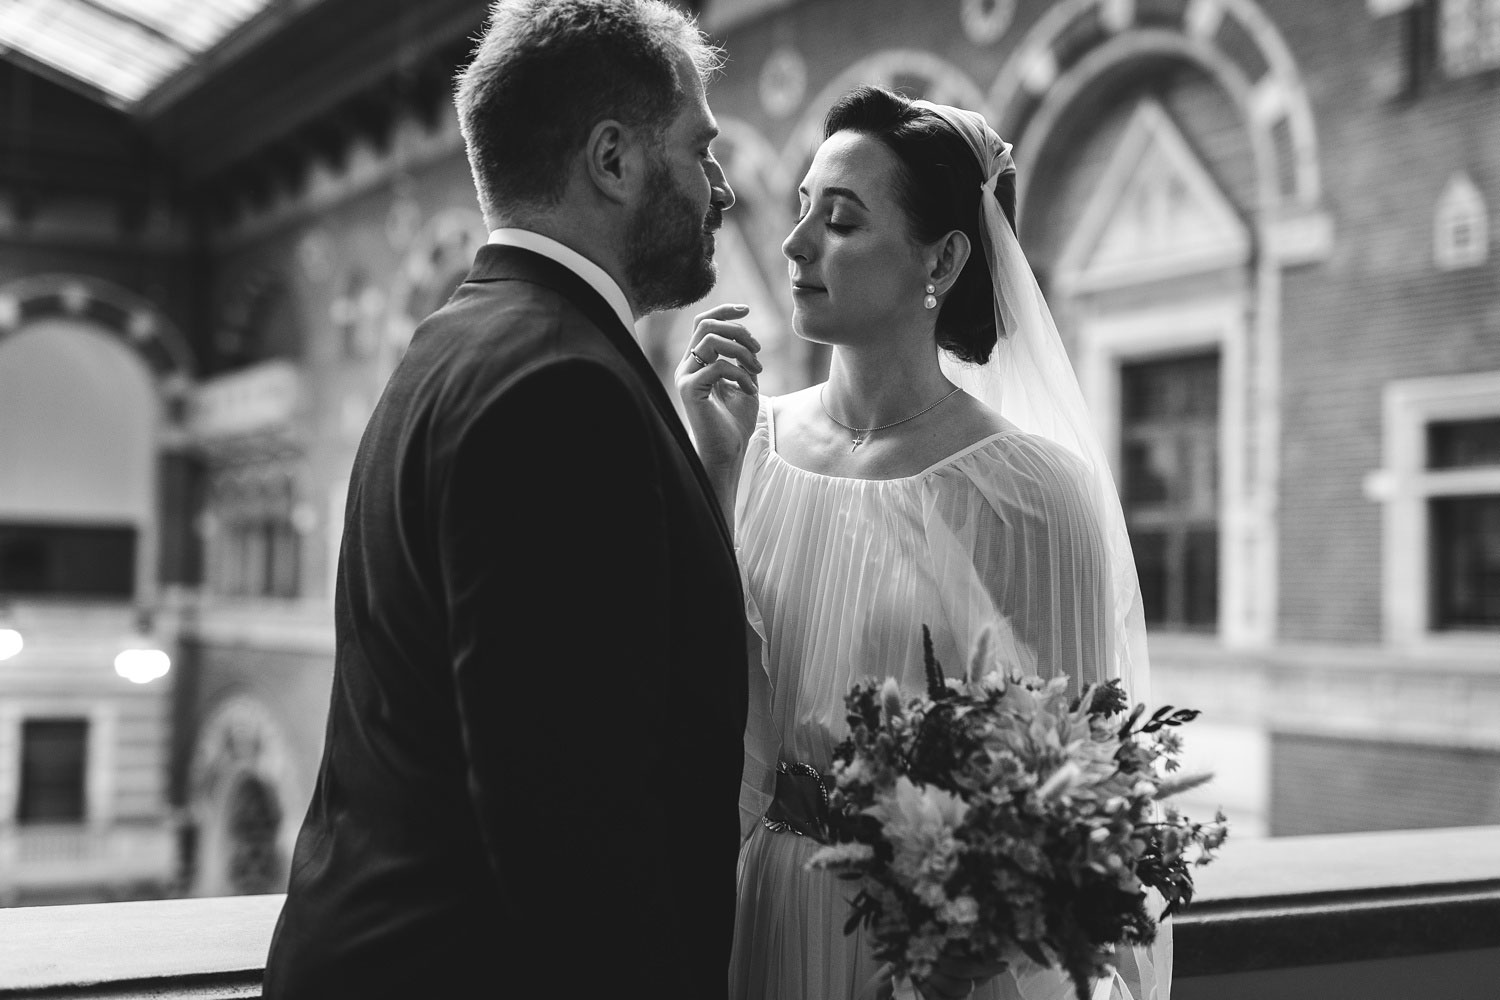 intimate moment between bride and groom after their civil wedding ceremony at Copenhagen city hall